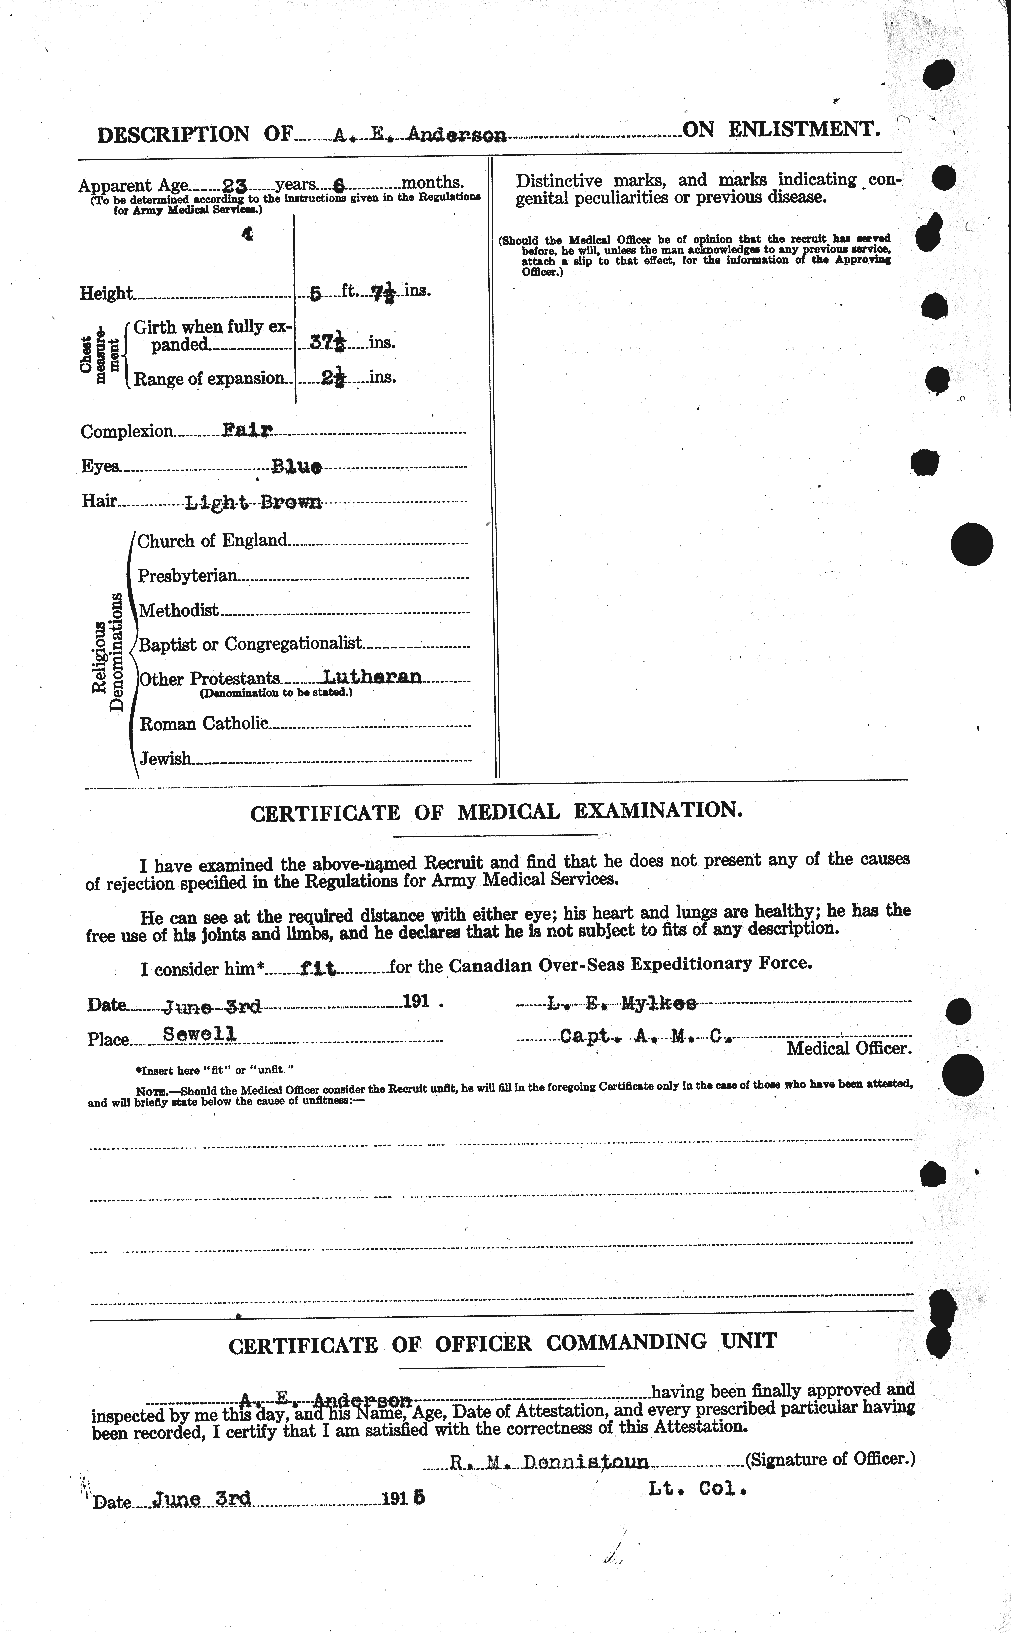 Personnel Records of the First World War - CEF 209360b